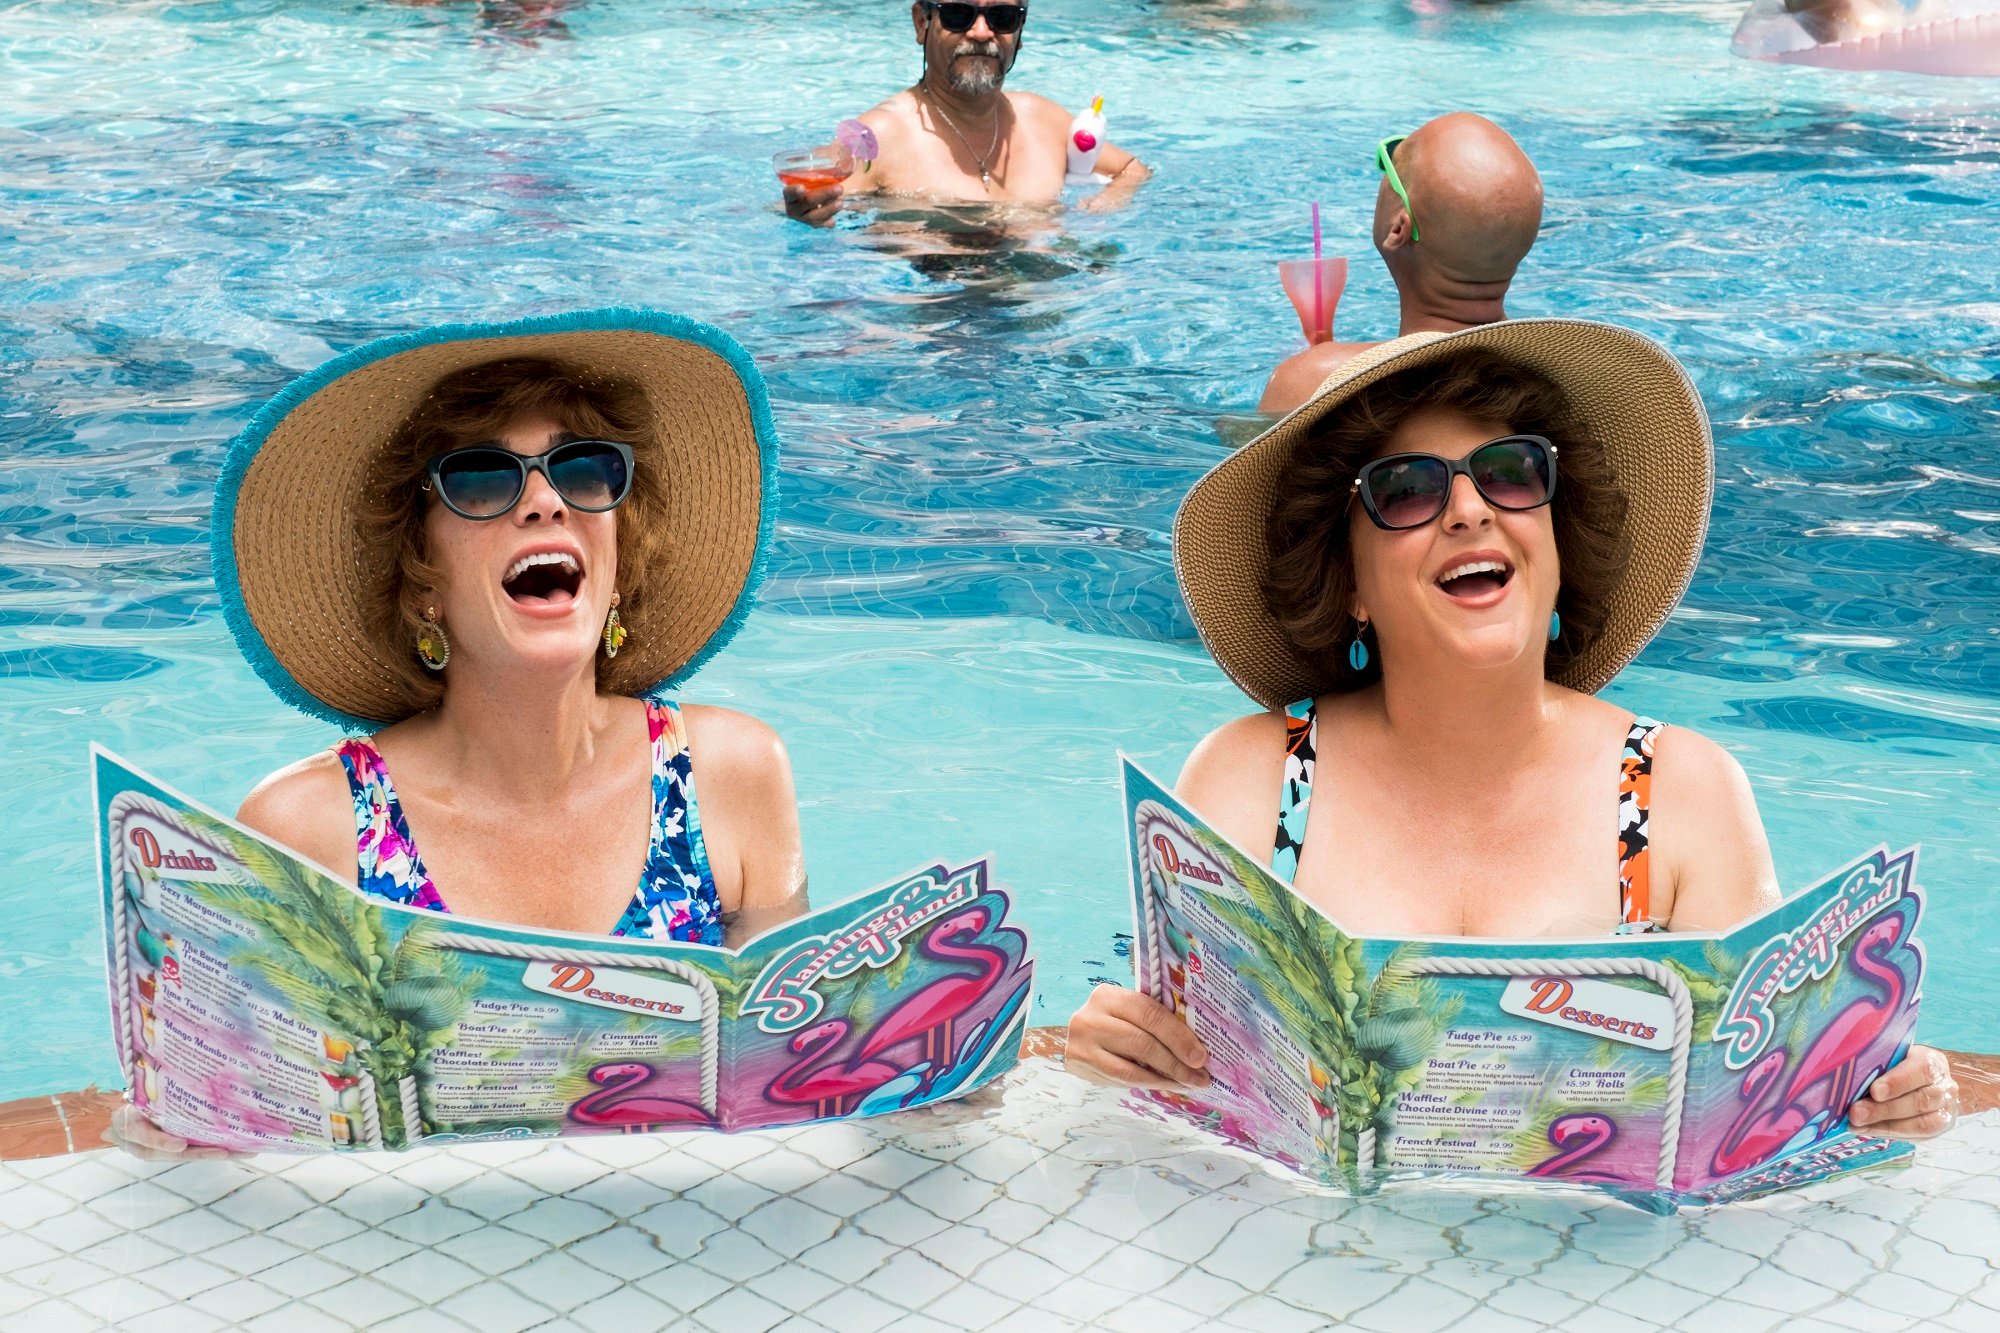 Barb and Star in the pool